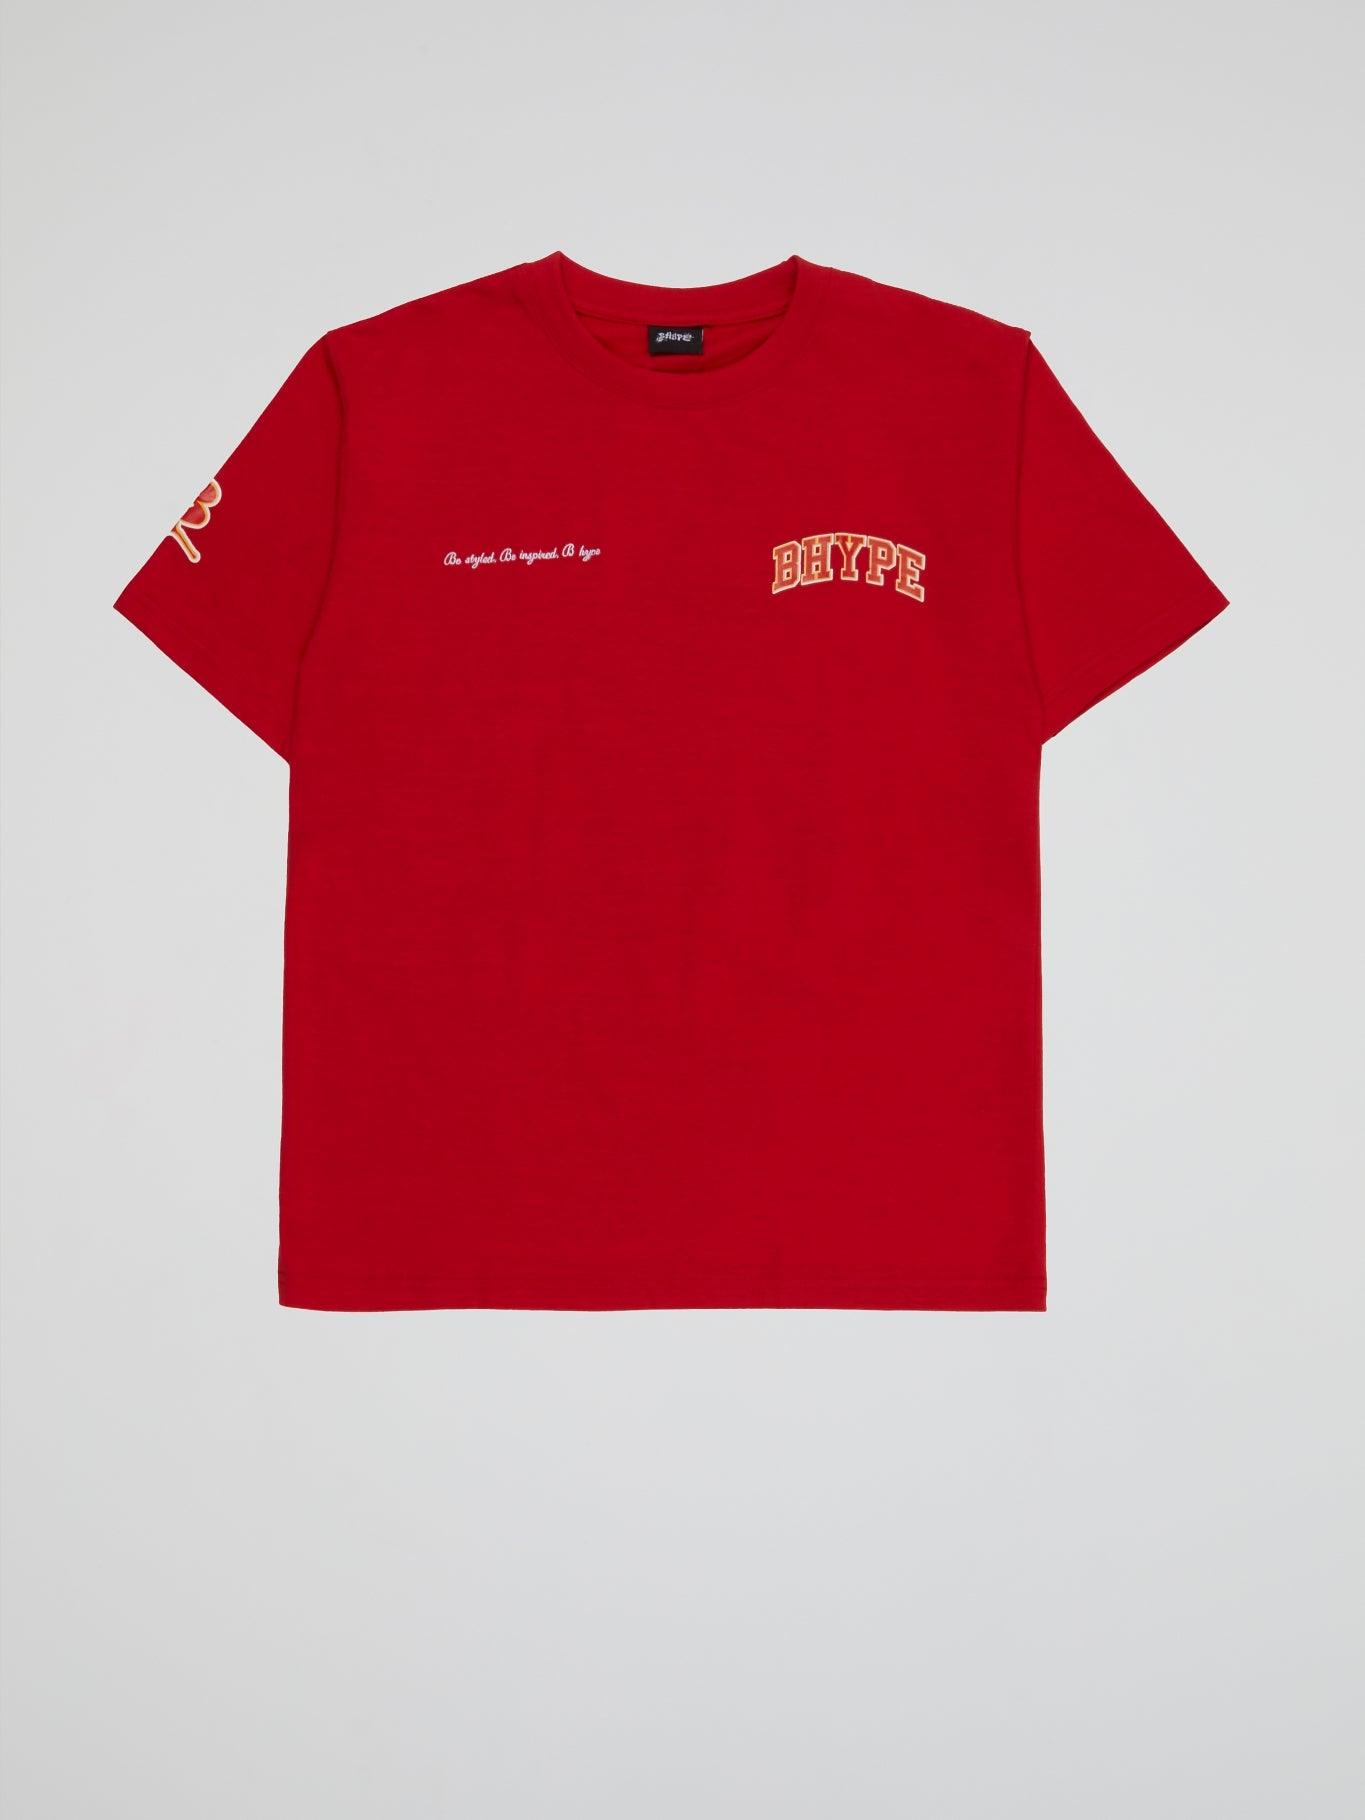 BHYPE RED T-SHIRT VARSITY COLLECTION - B-Hype Society